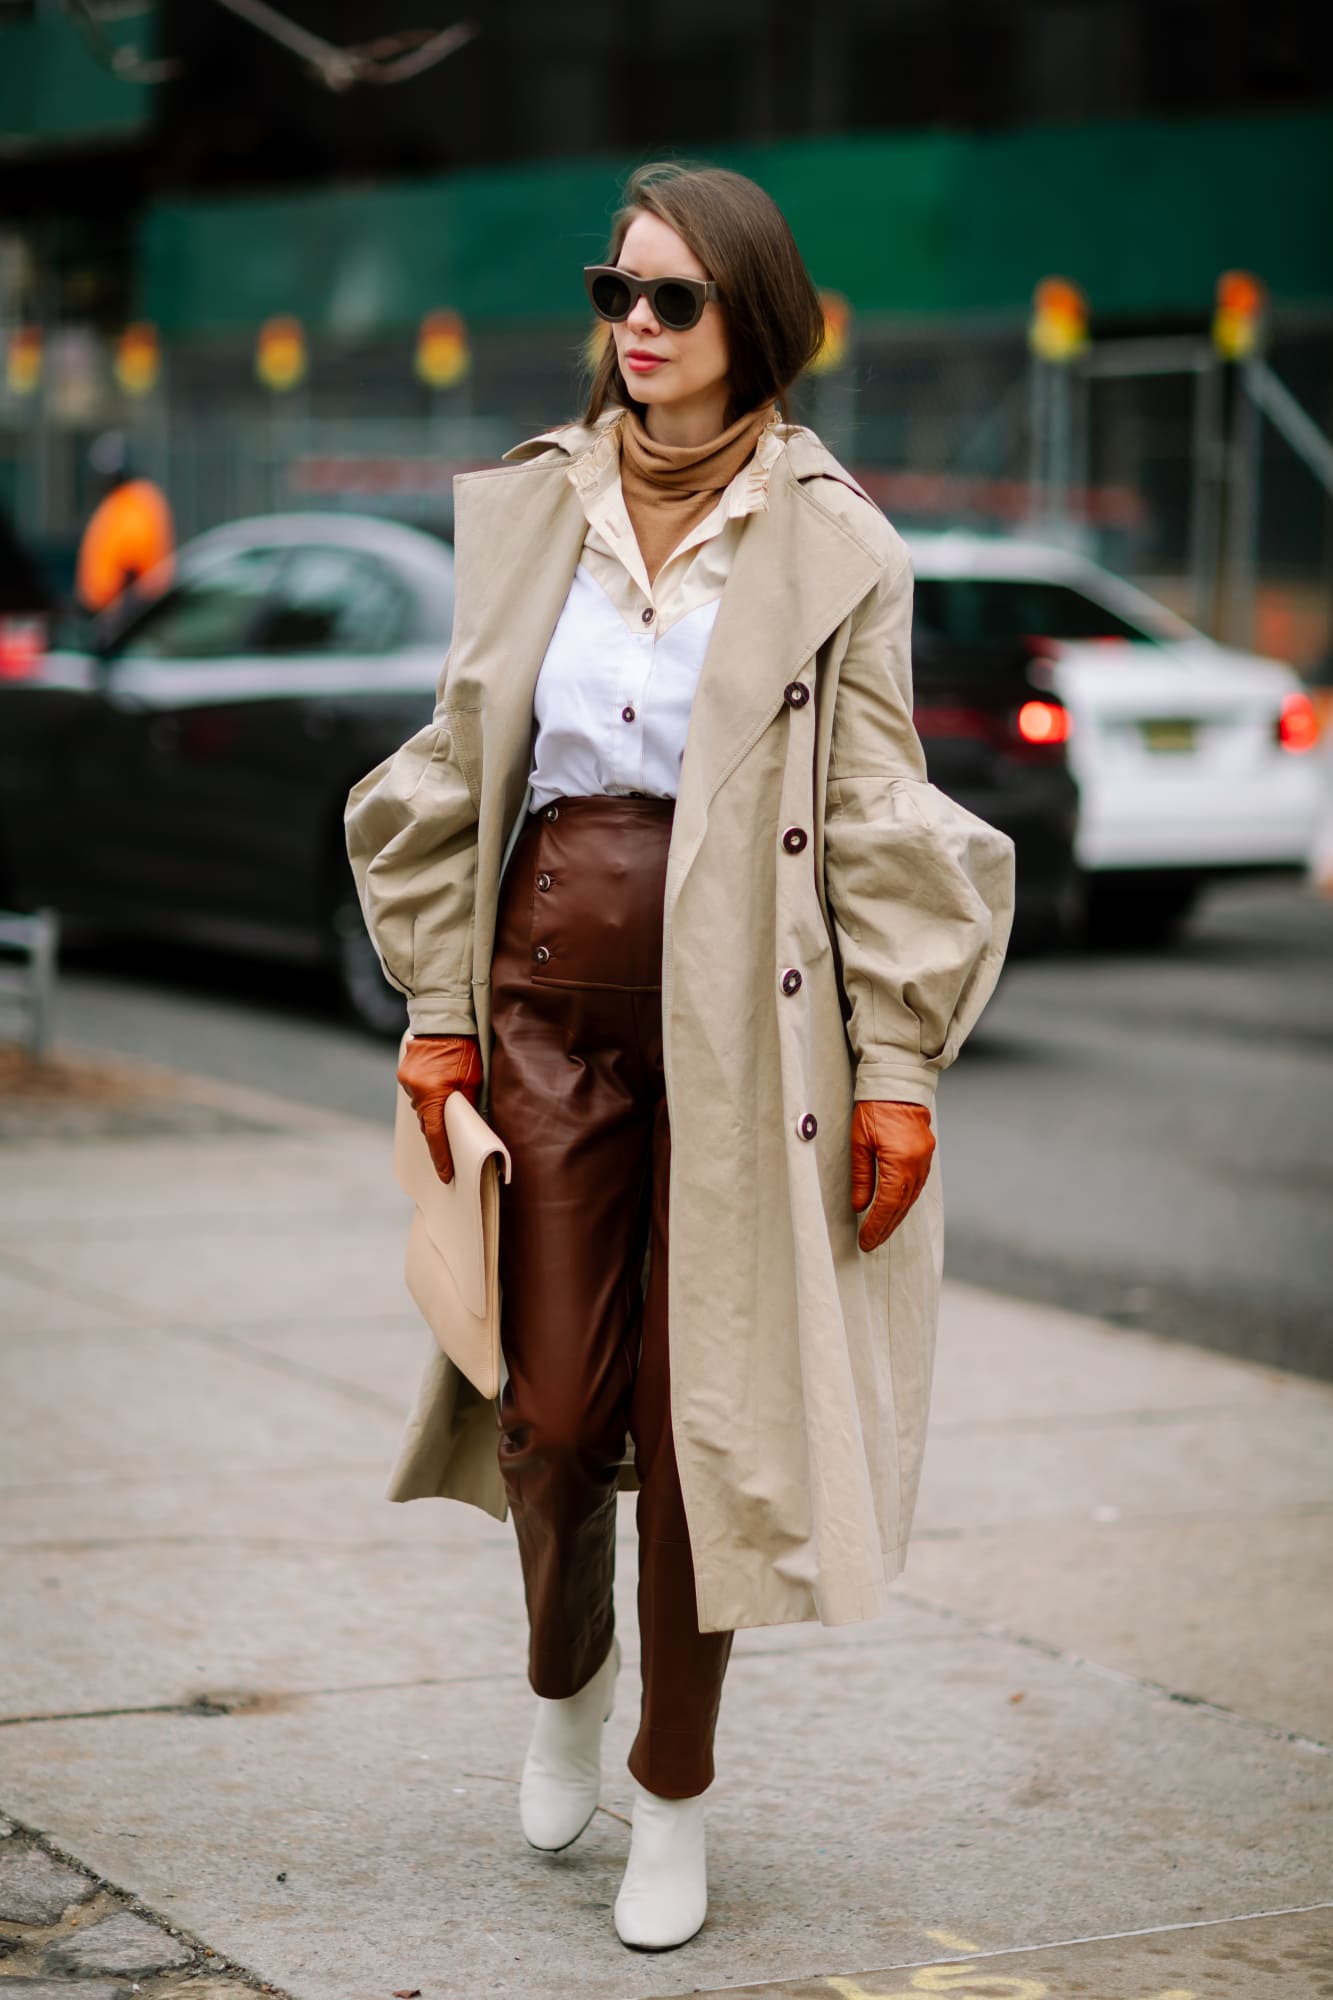 NYFW Street Style Palettes - Blue is in Fashion this Year